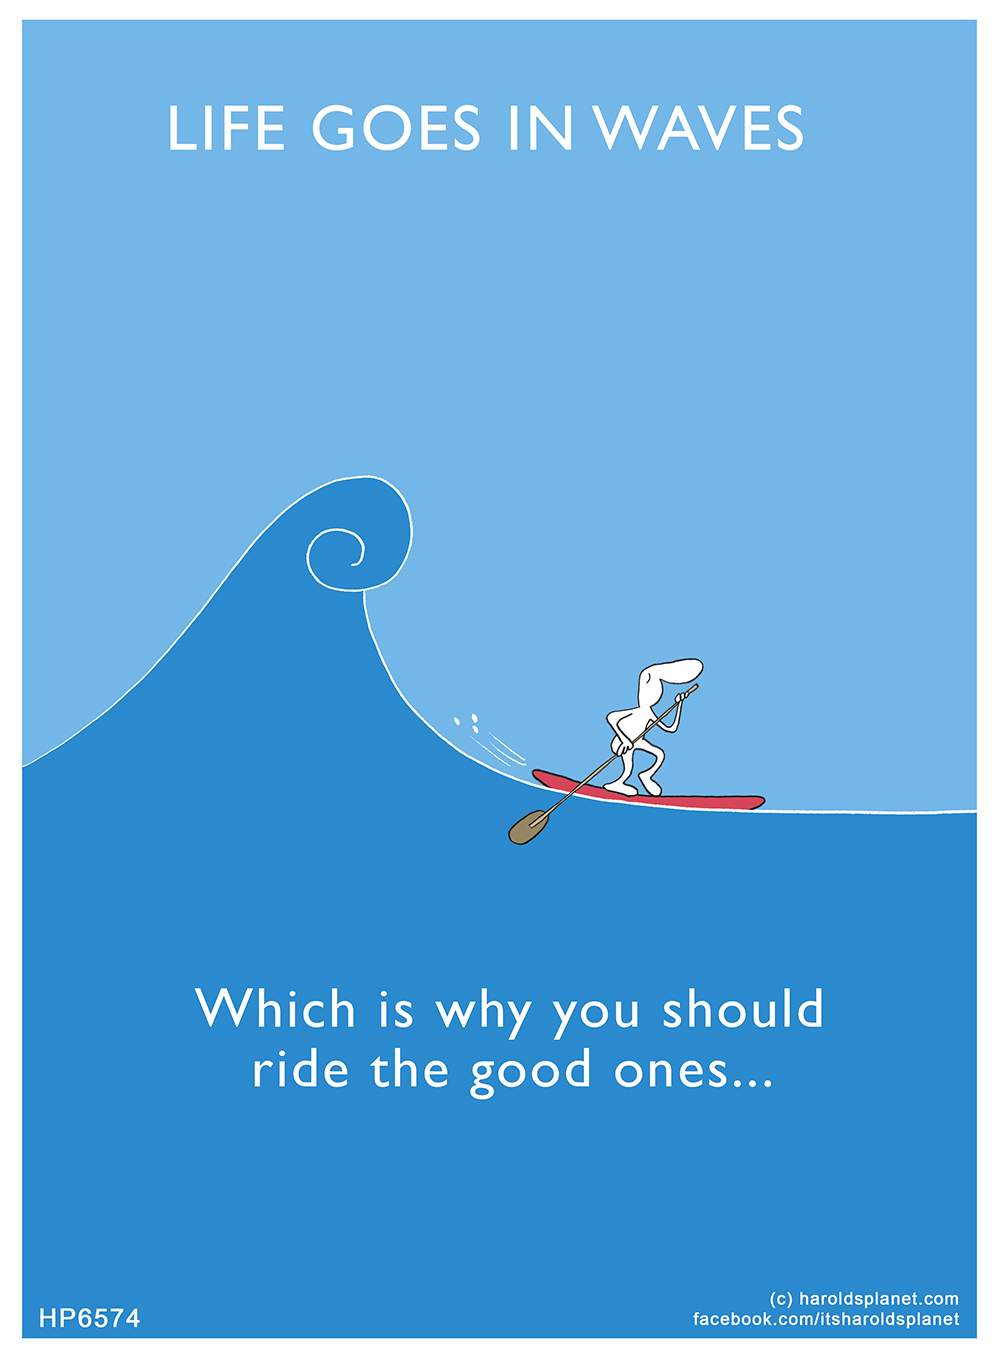 Harold's Planet: LIFE GOES IN WAVES - which is why you should ride the good ones....